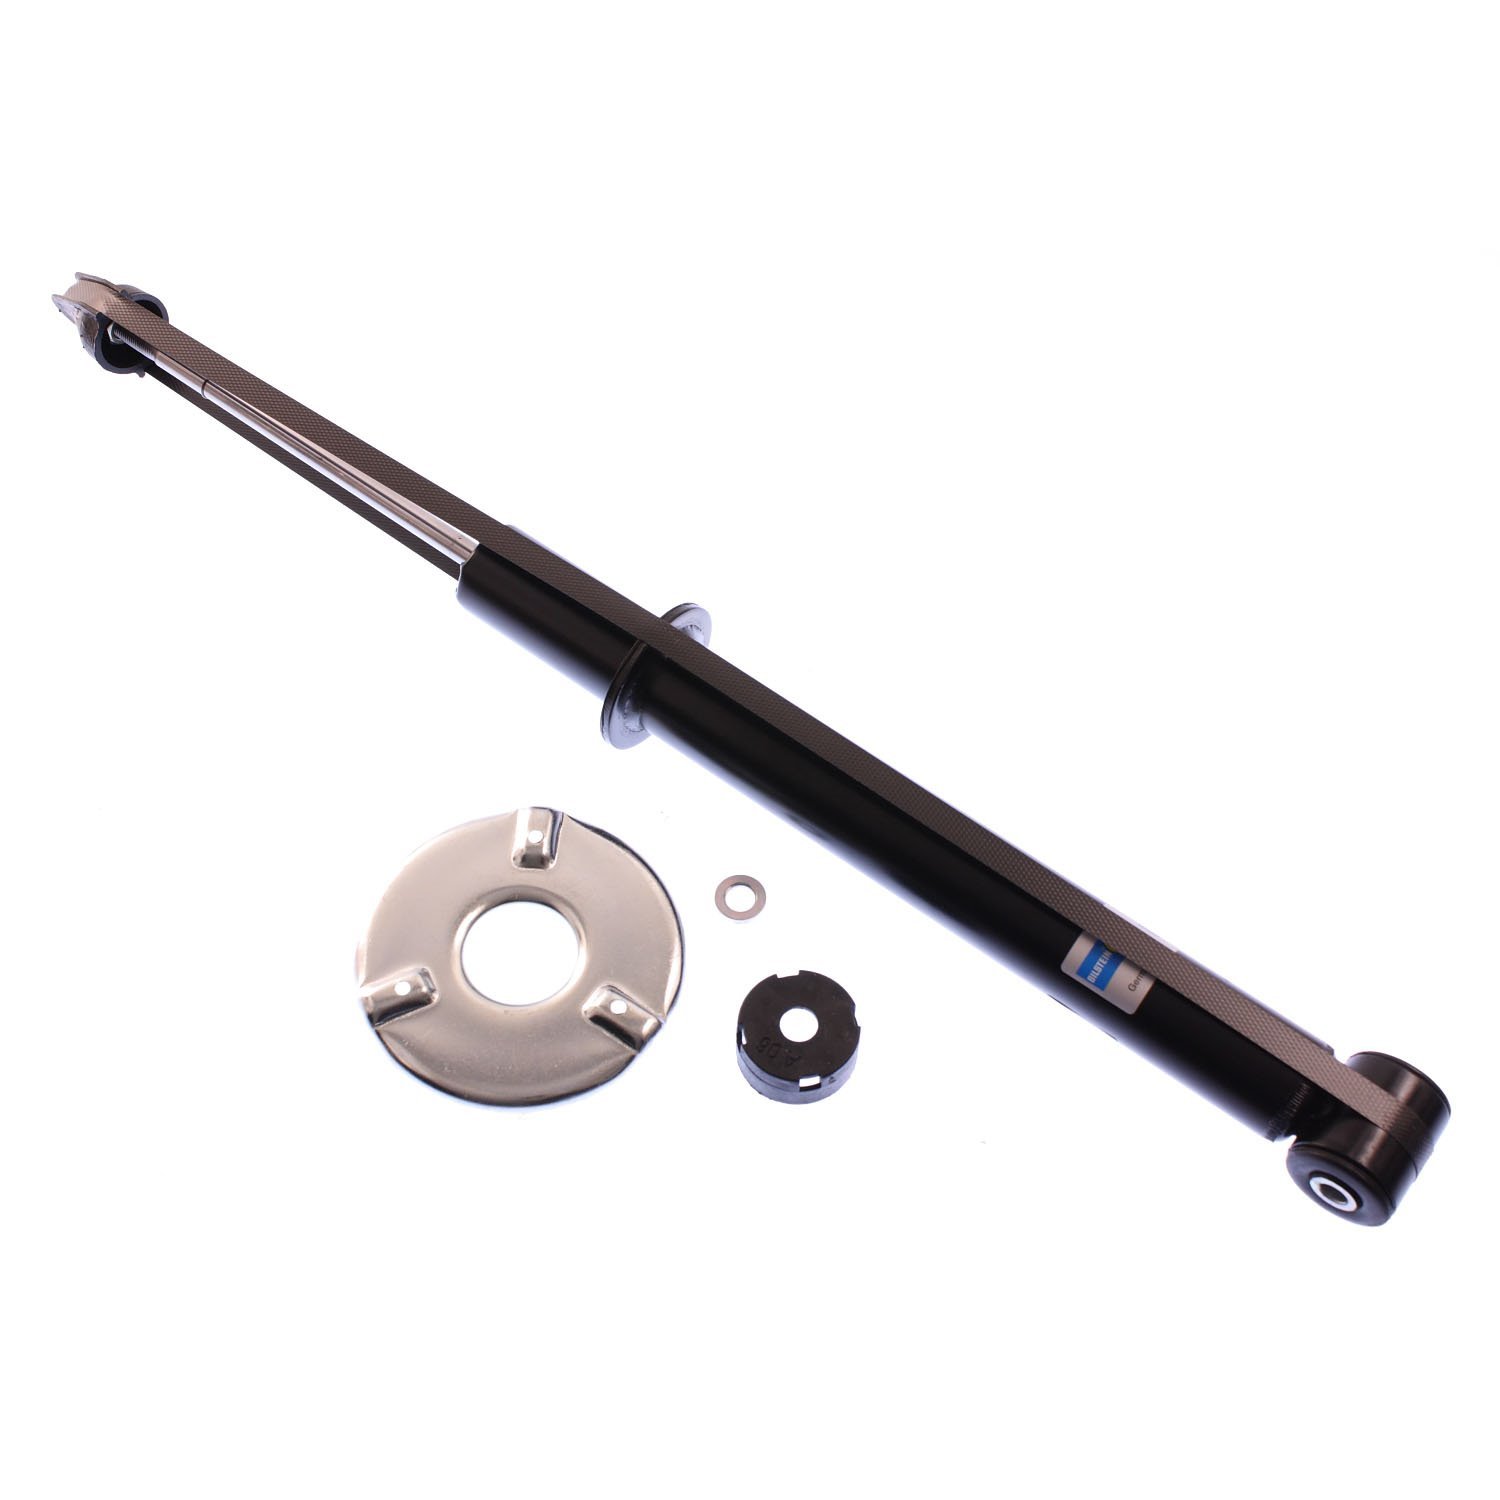 B4 OE Replacement - Shock Absorber